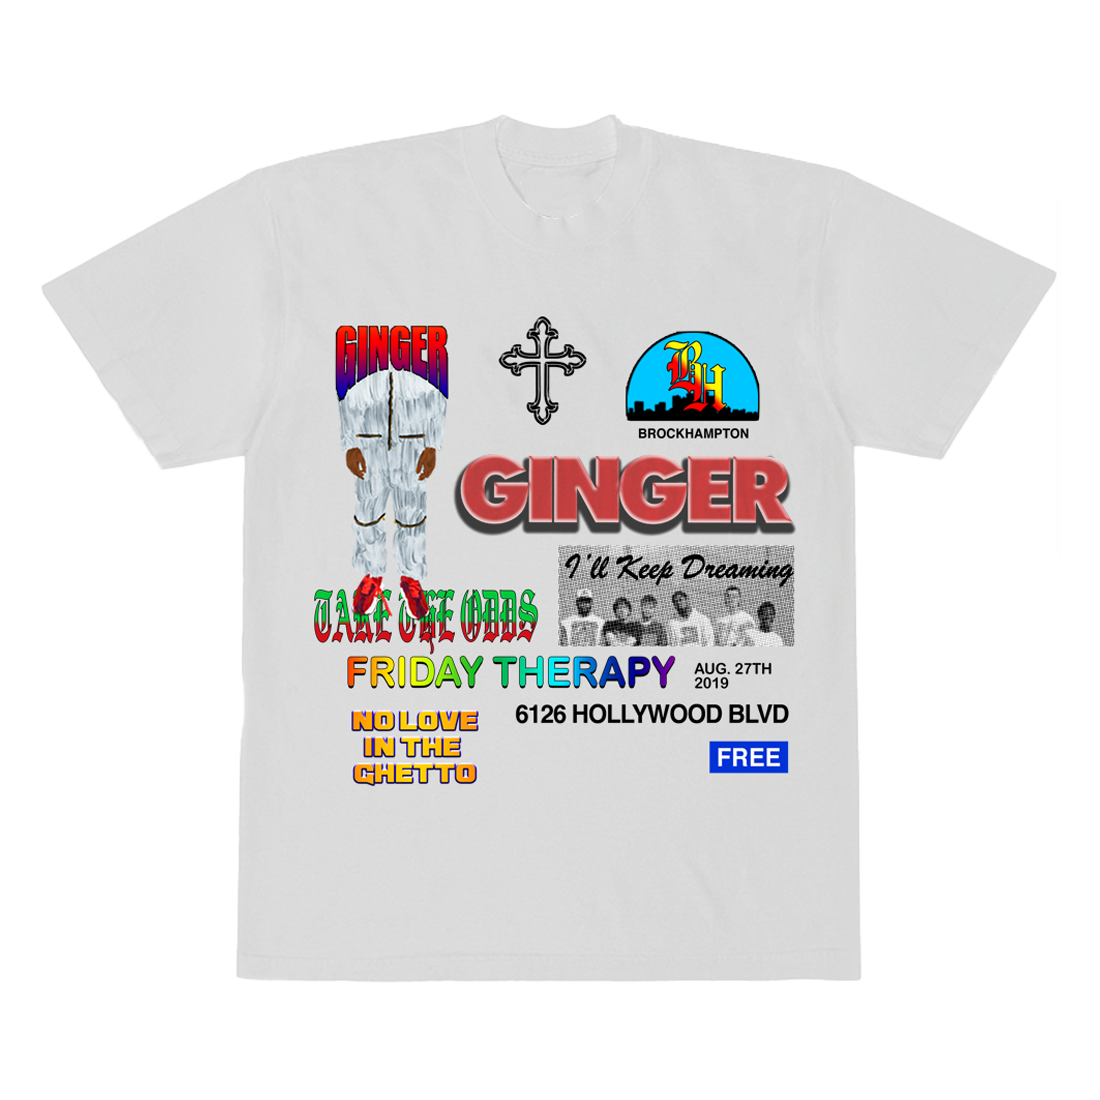 FRIDAY THERAPY T-SHIRT